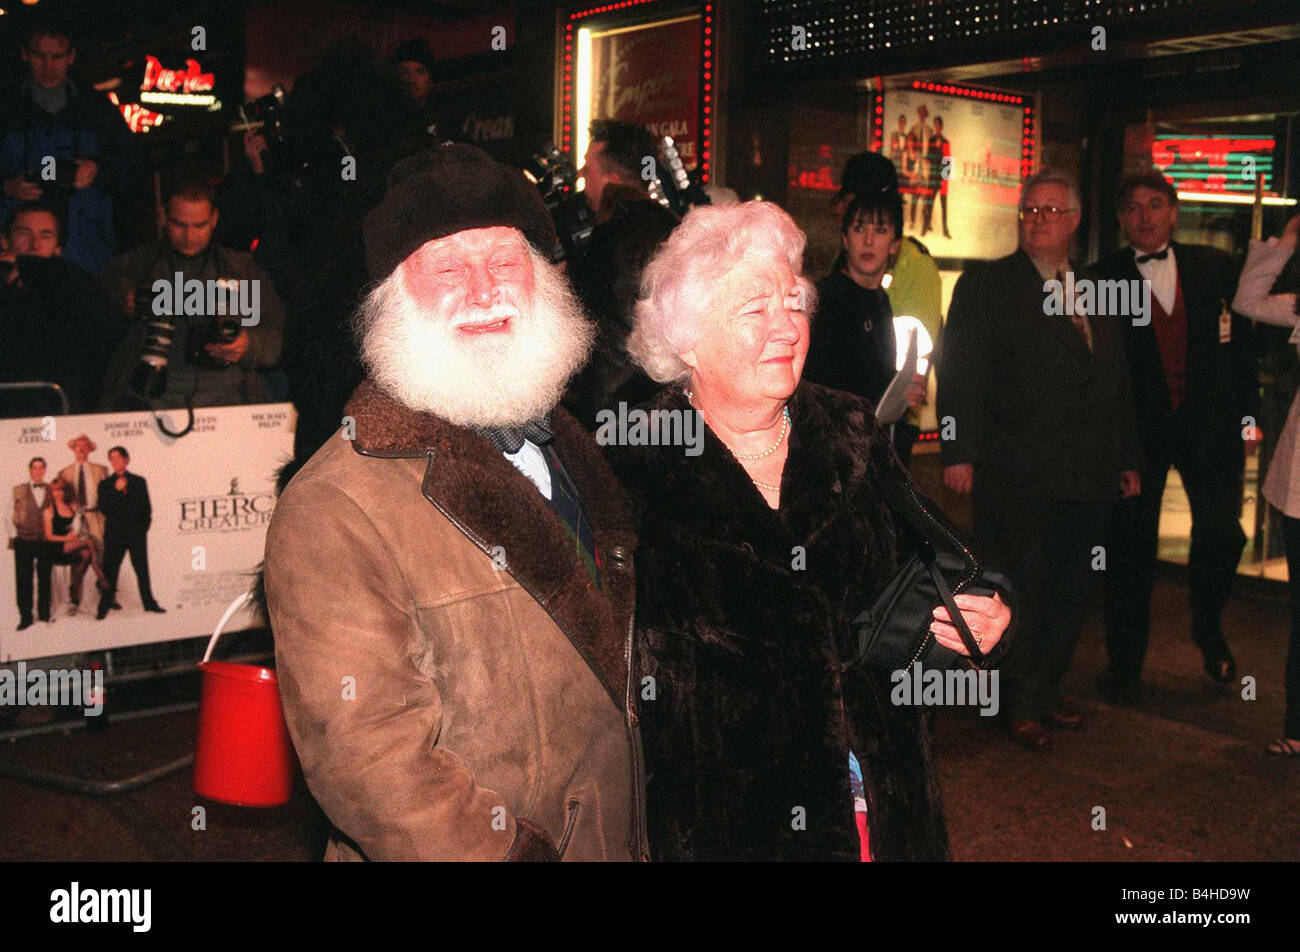 buster-merryfield-actor-with-wife-attend-the-film-premiere-of-fierce-B4HD9W.jpg